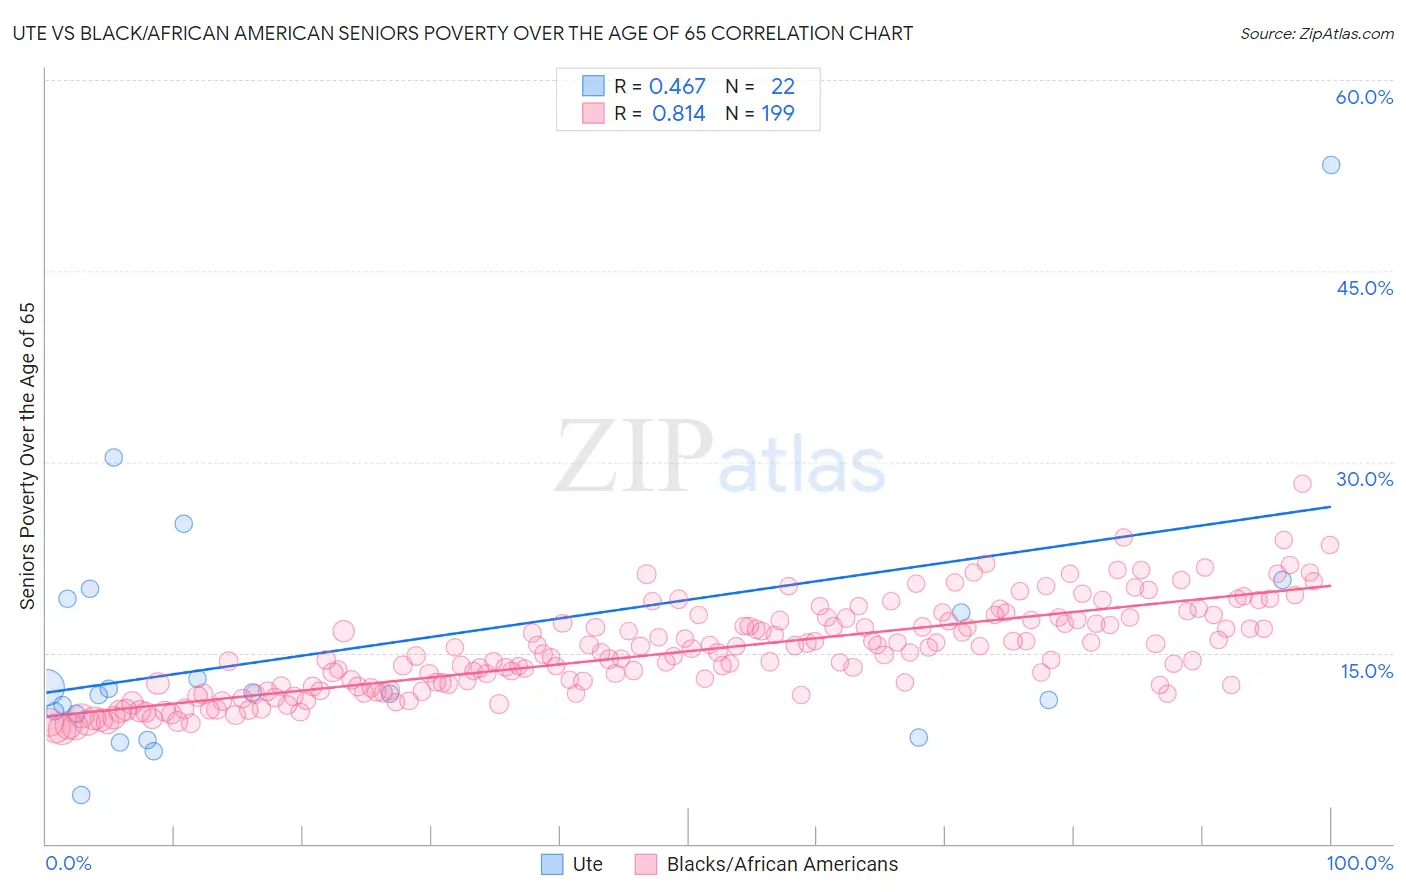 Ute vs Black/African American Seniors Poverty Over the Age of 65